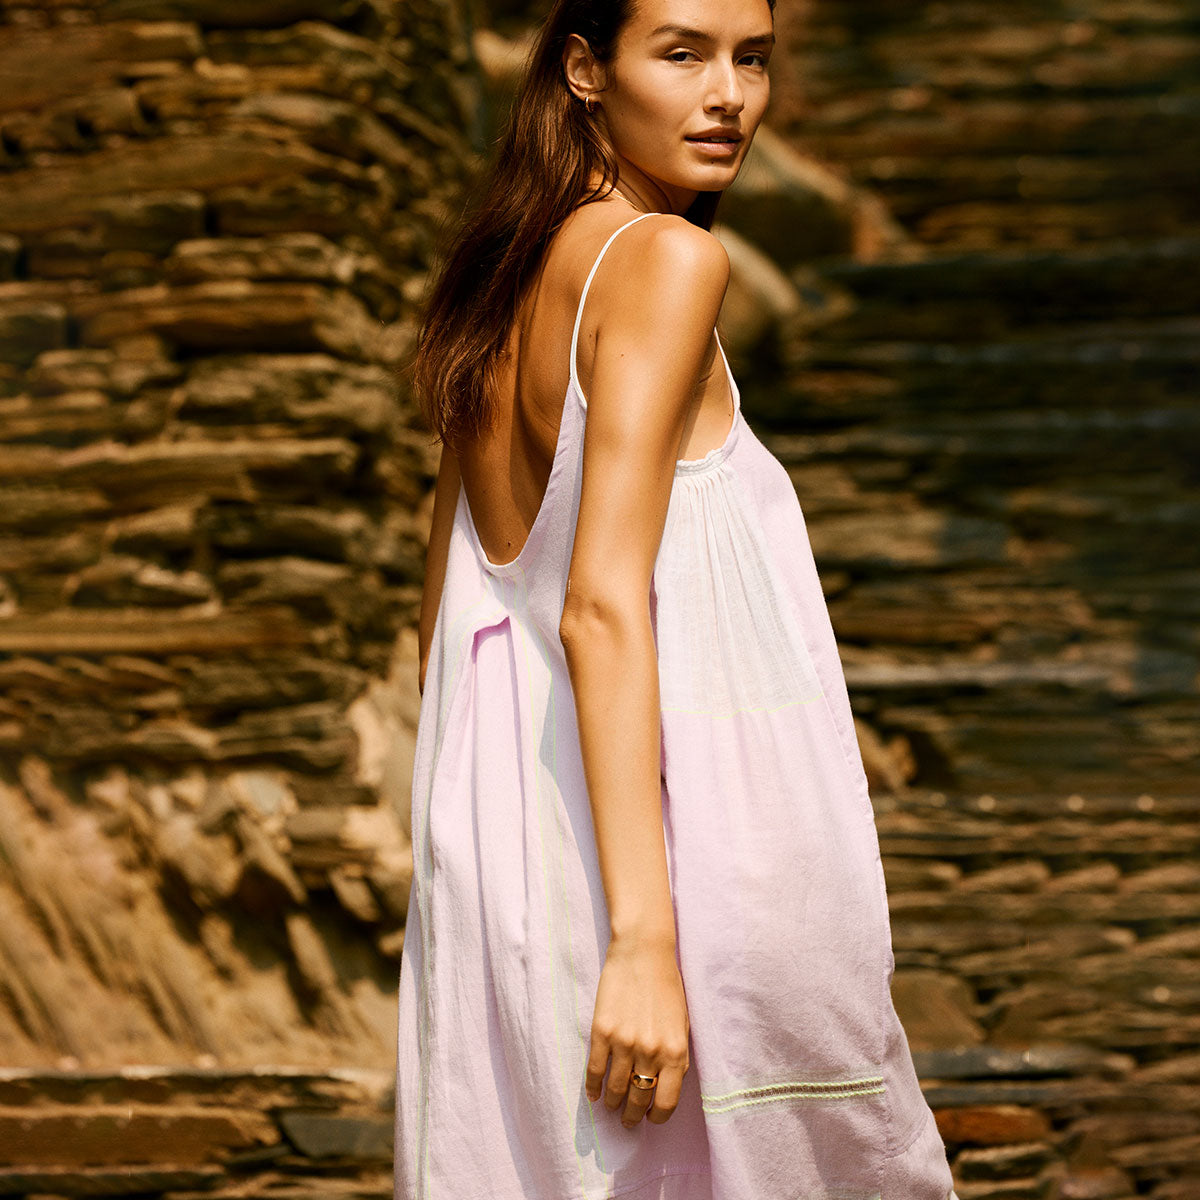 Woman walking on a cliff looking over her shoulder wearing a light pink slip dress. 